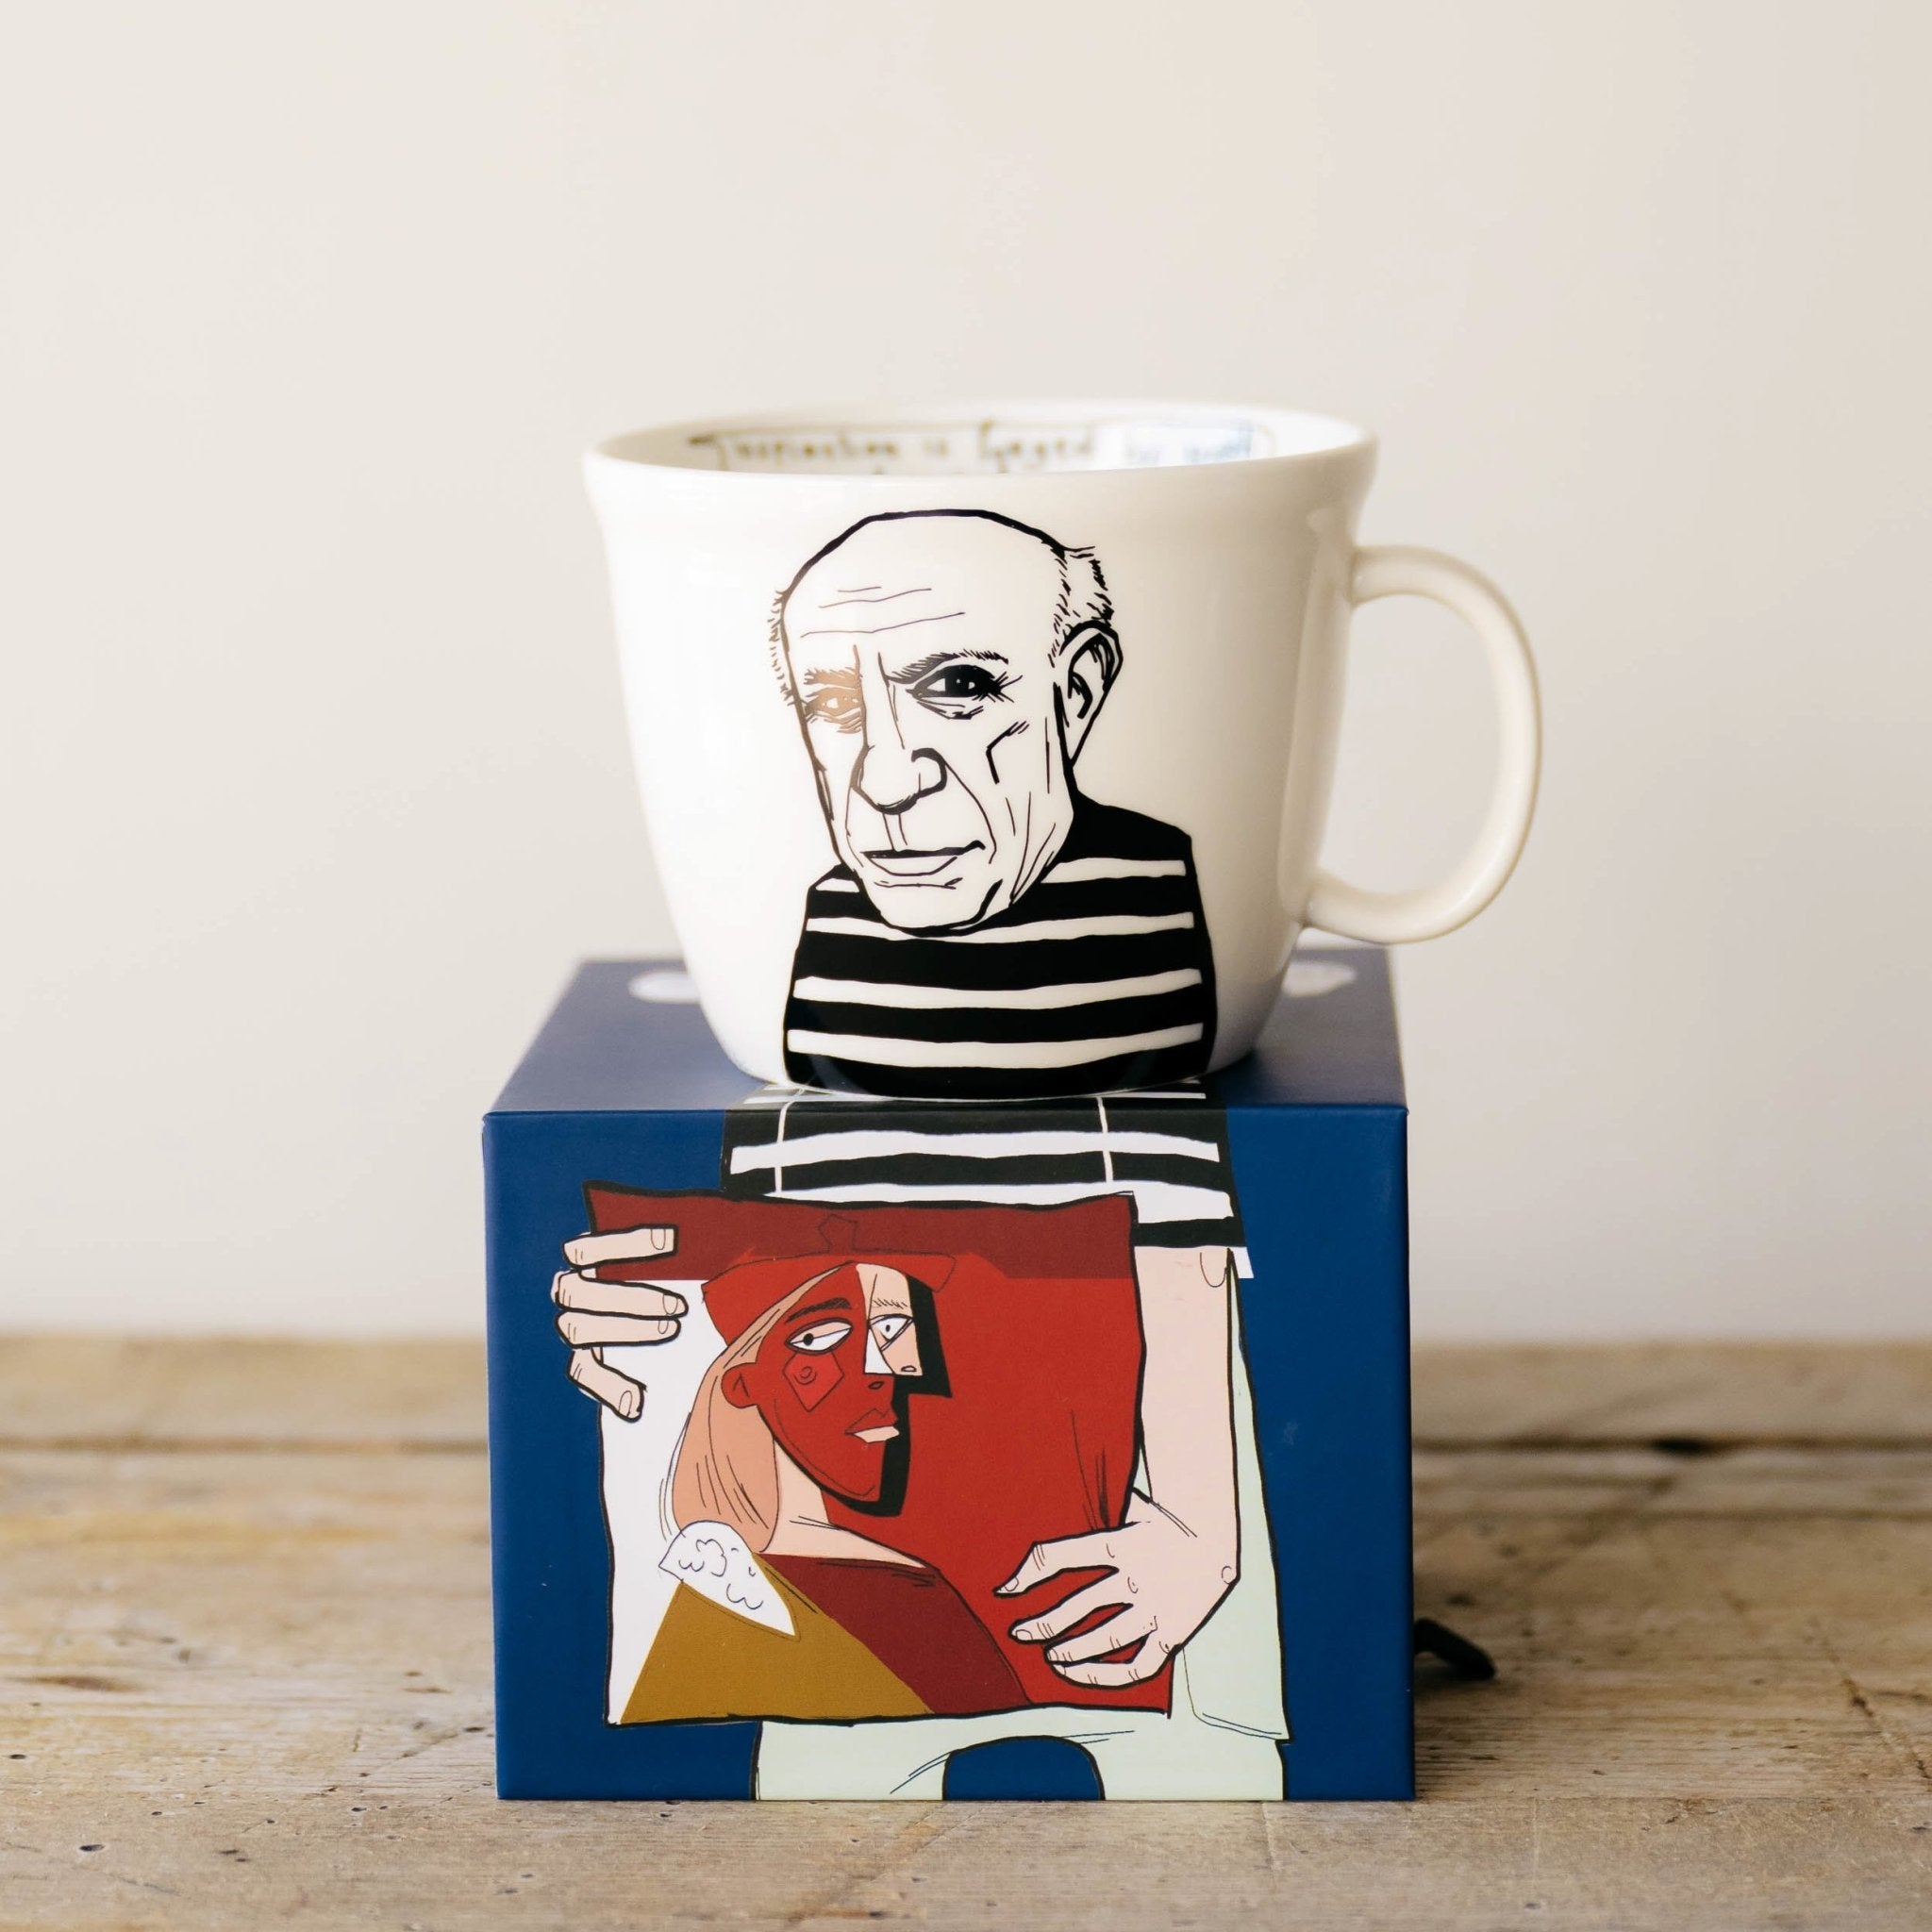 Porcelain cup inspired by Pablo Picasso on the box